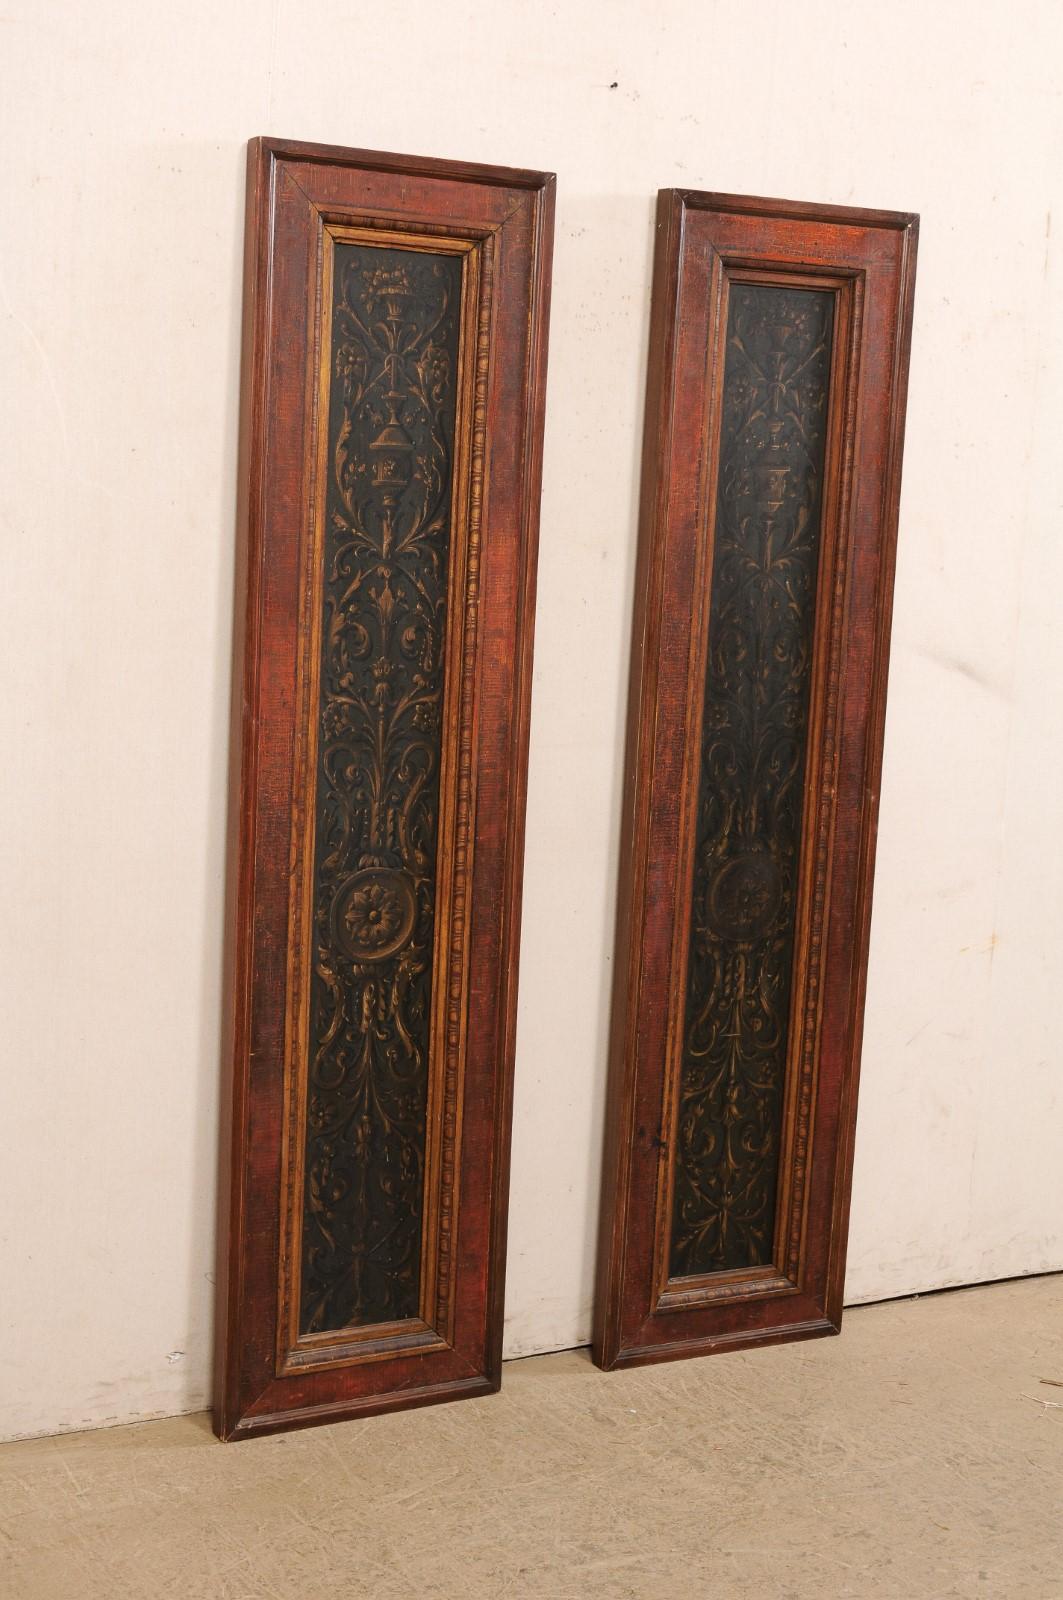 19th Century French Pair of Decoratively Hand-Painted Wooden Wall Panels For Sale 3